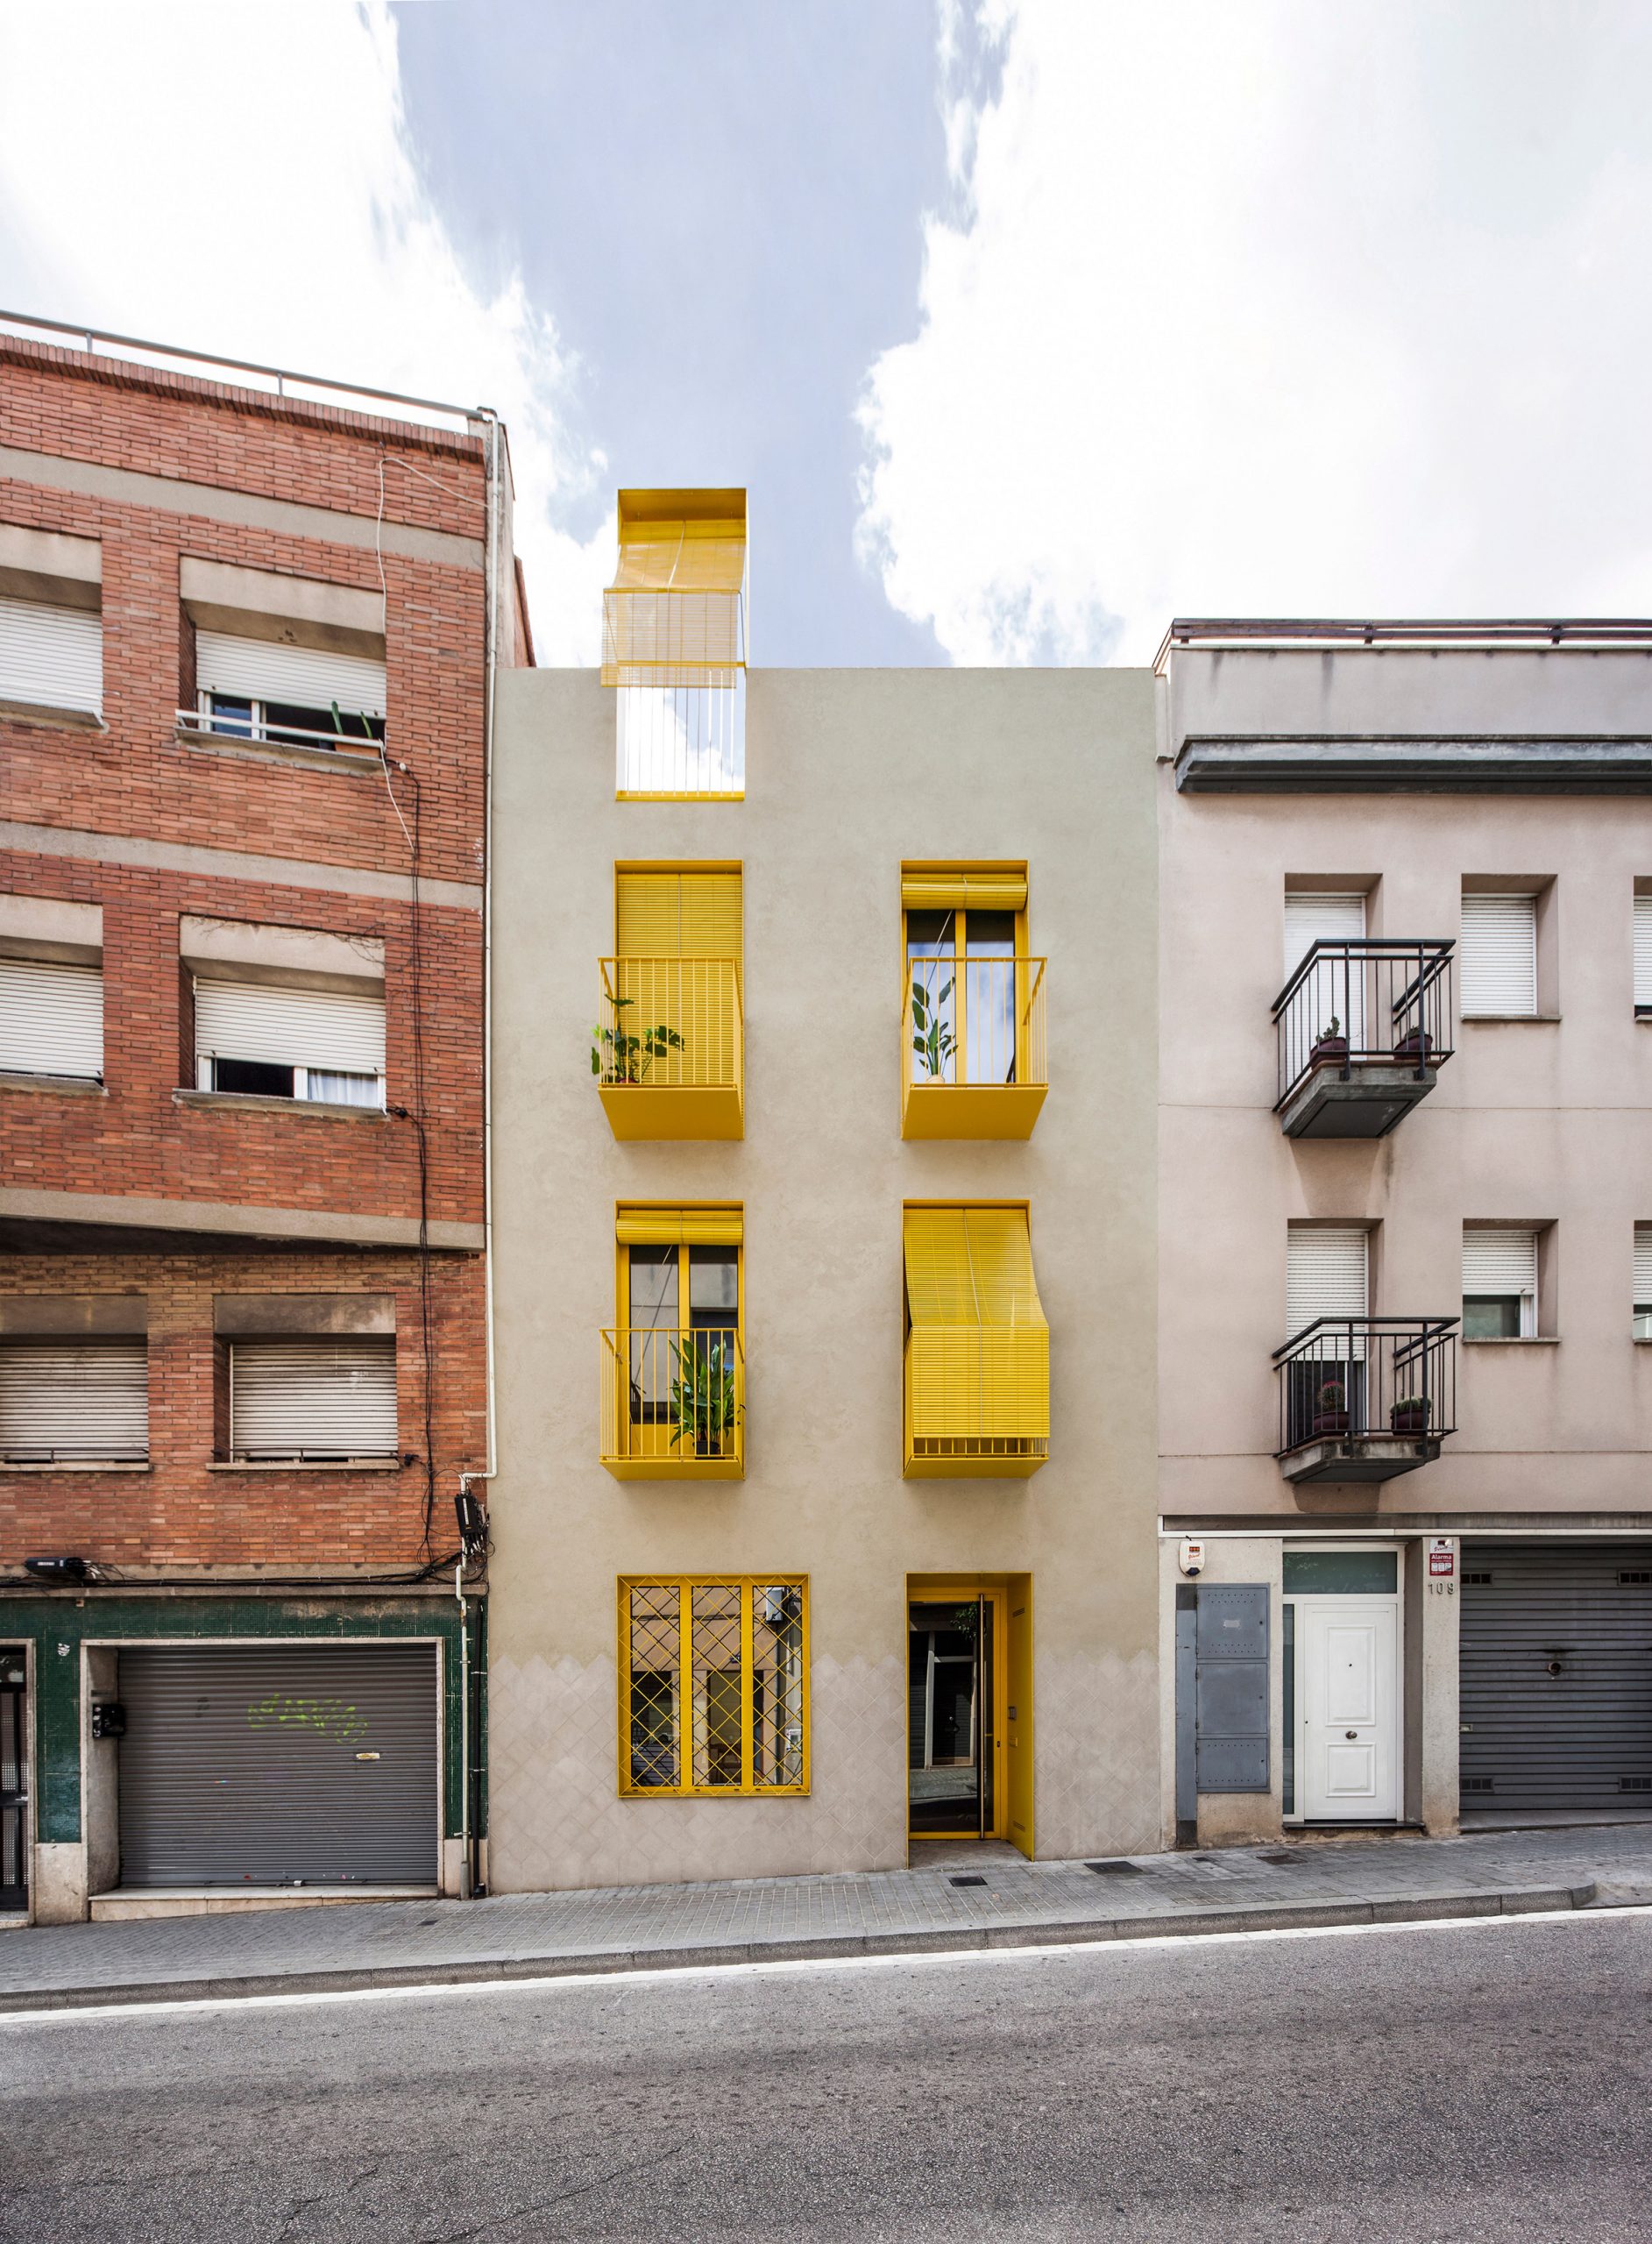 The design is an infill building by Anna & Eugeni Bach